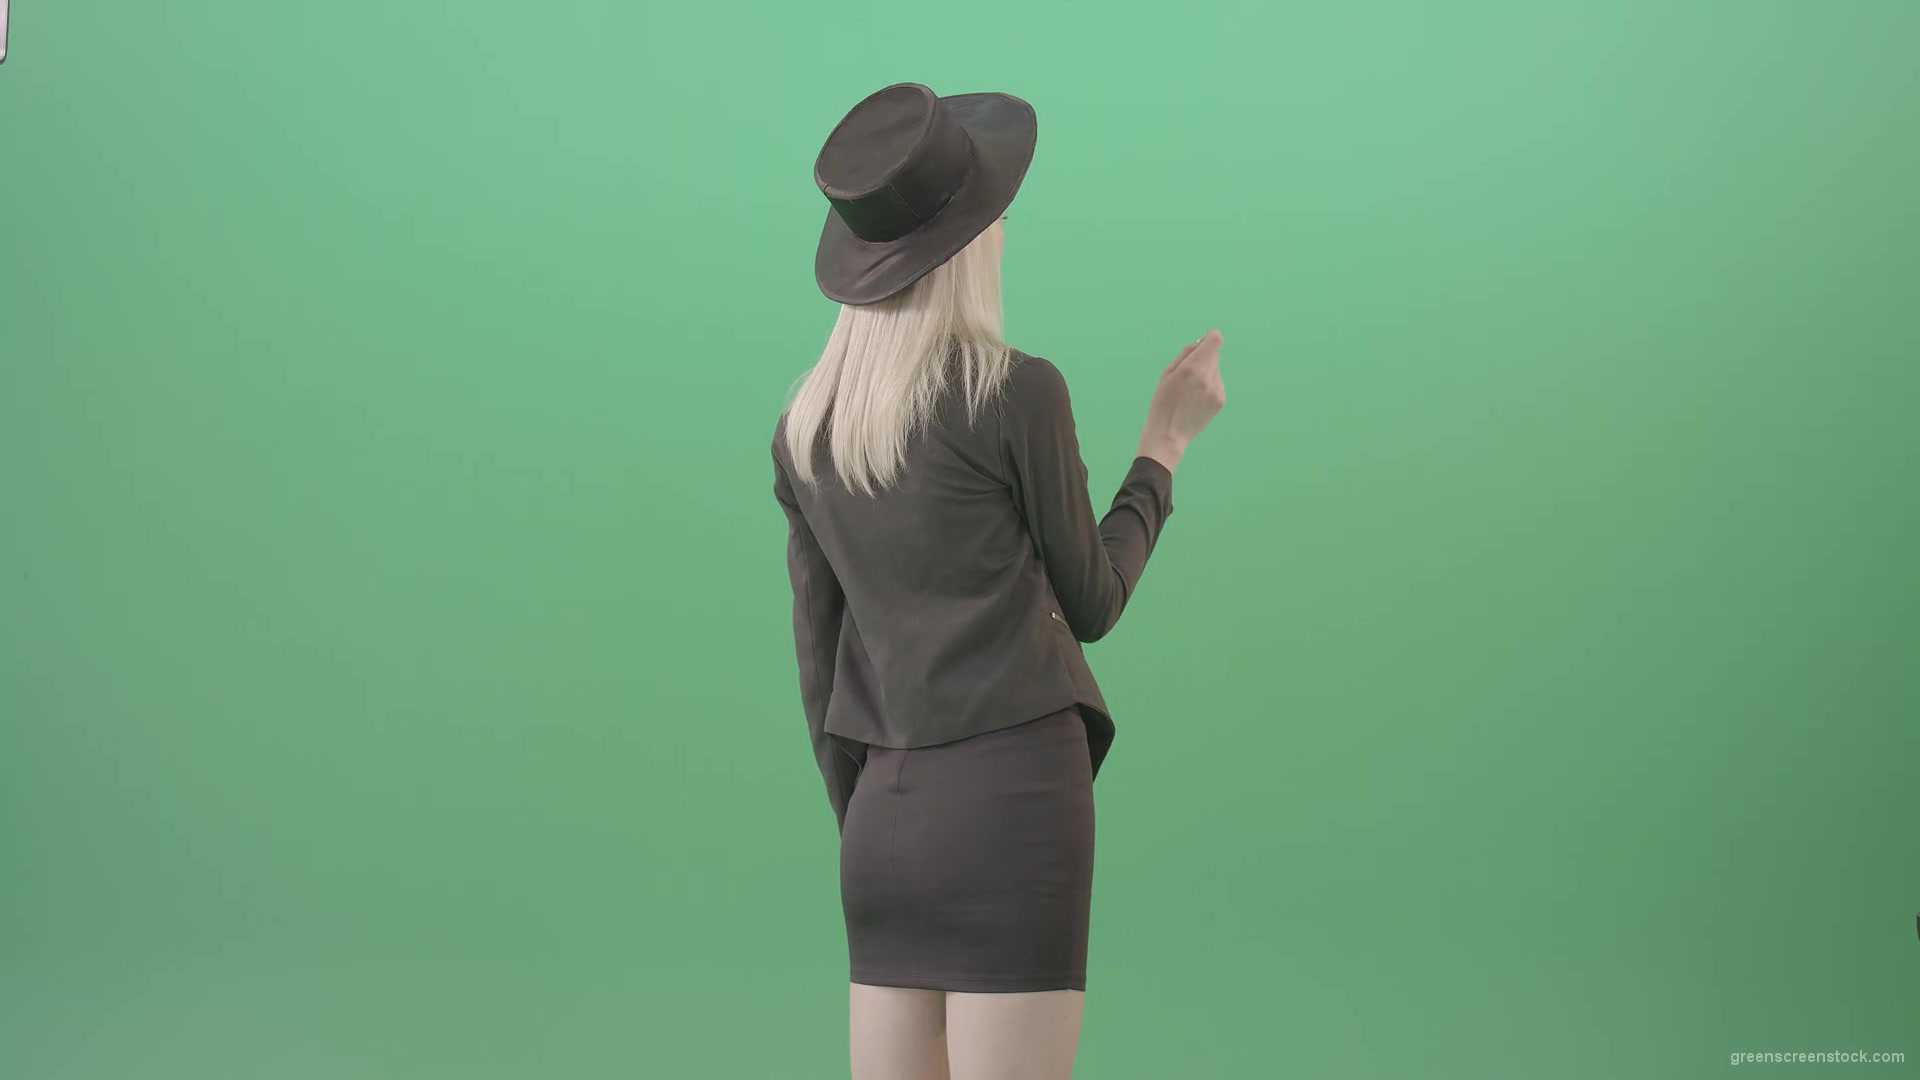 Blonde-Girl-looking-digital-virtual-products-on-touch-screen-from-back-side-4K-Green-Screen-Video-Footage-1920_005 Green Screen Stock